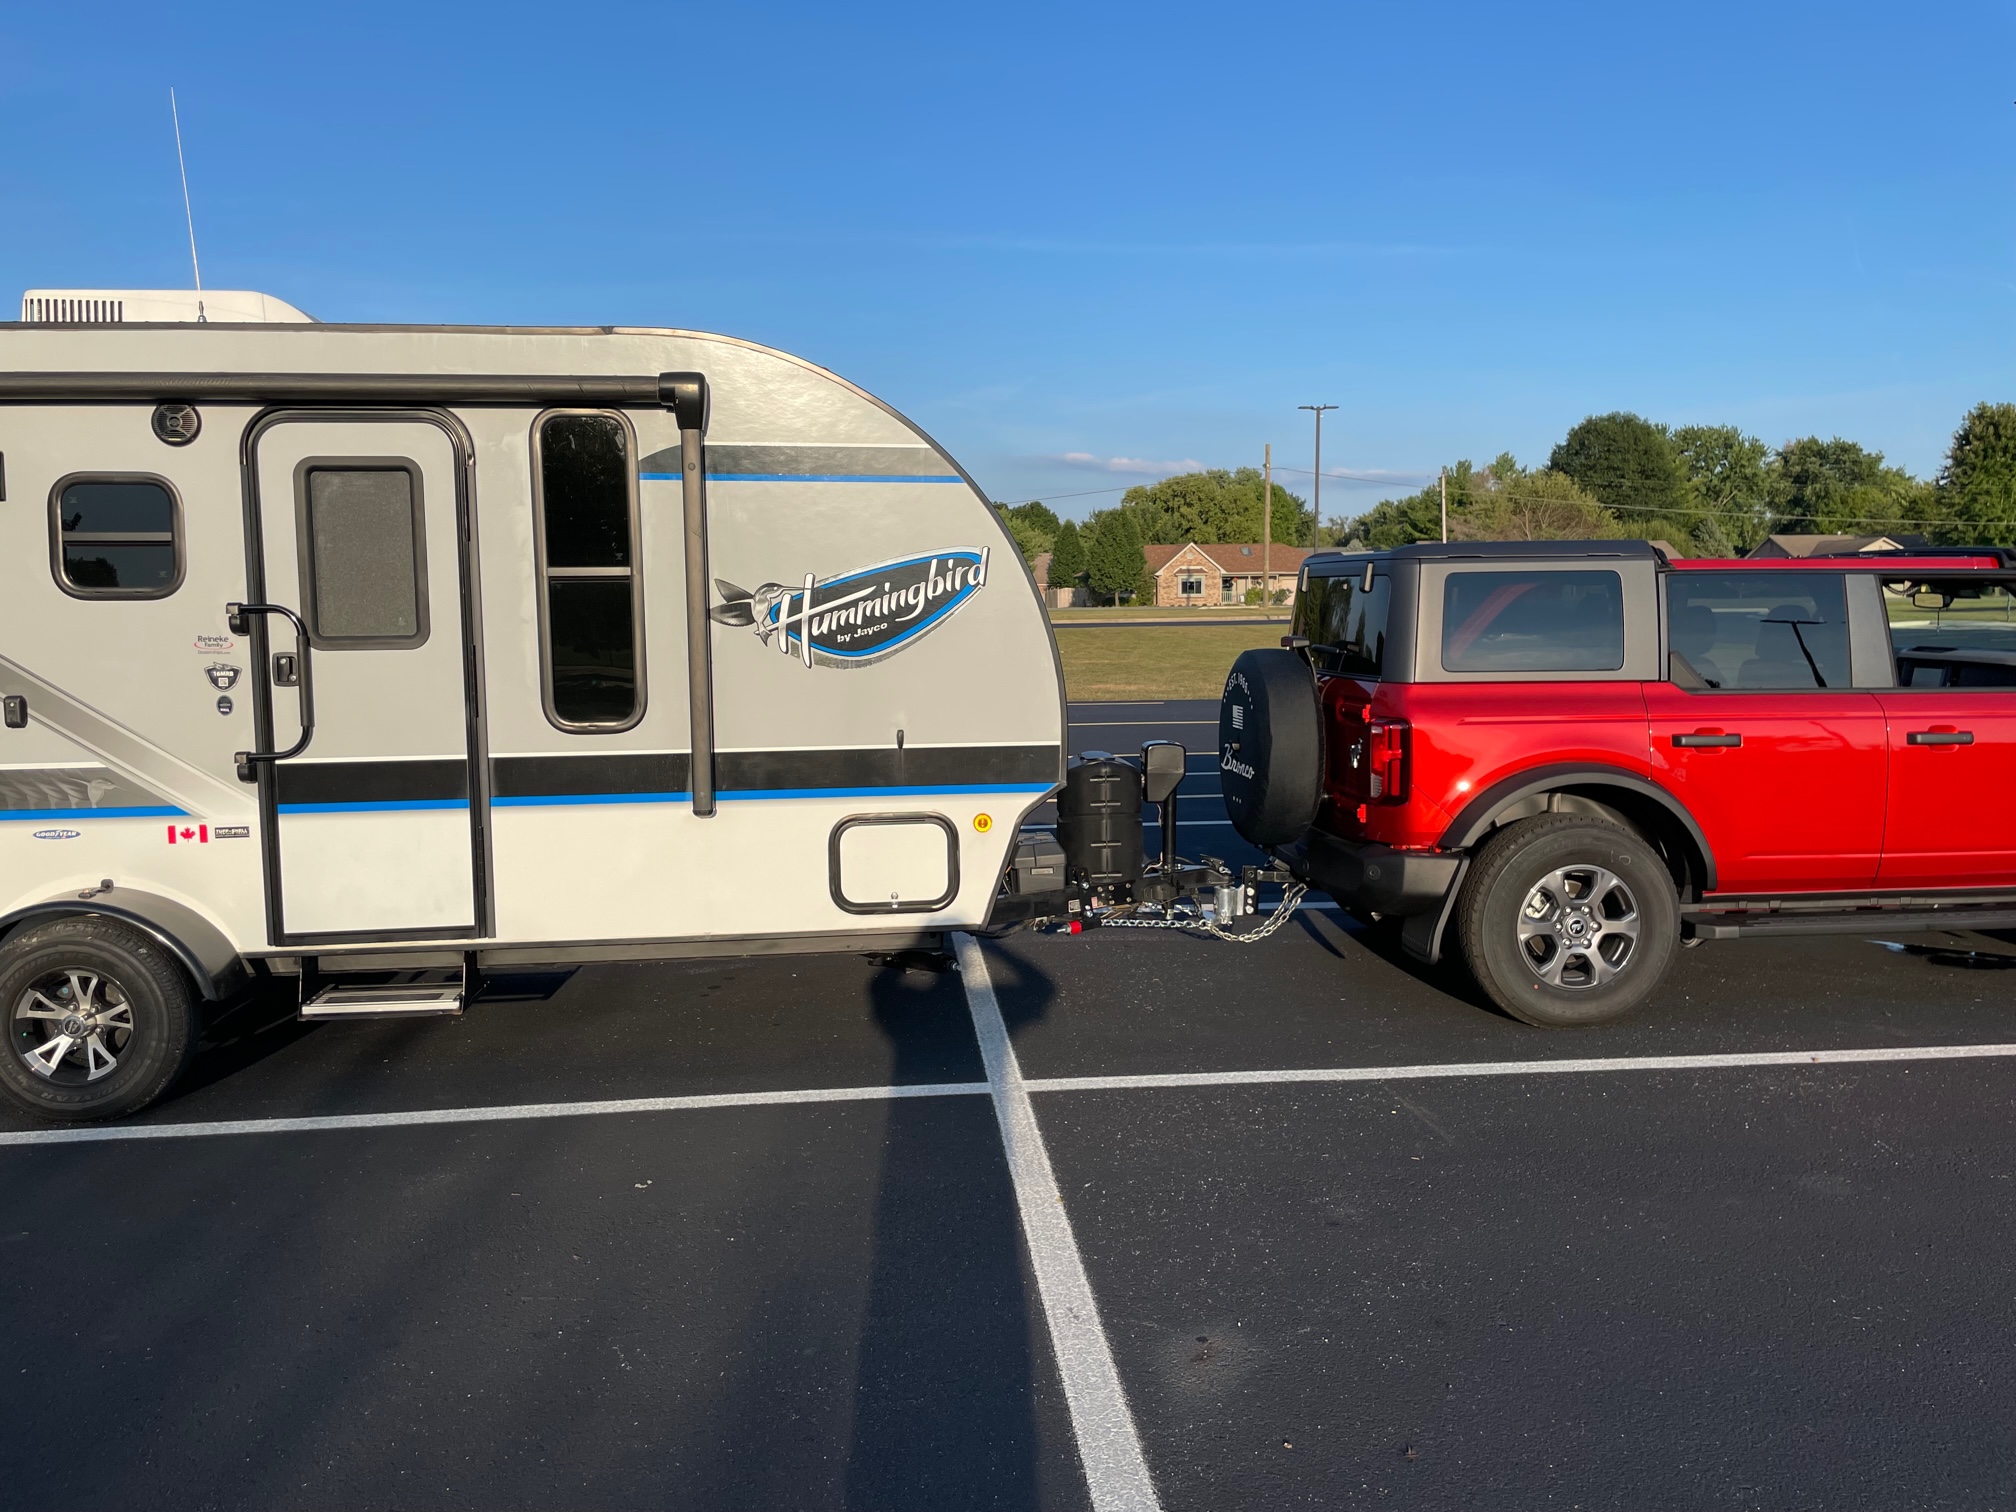 Ford Bronco Broncos Pulling Trailers Pics - Add Yours Bronco Camper 2